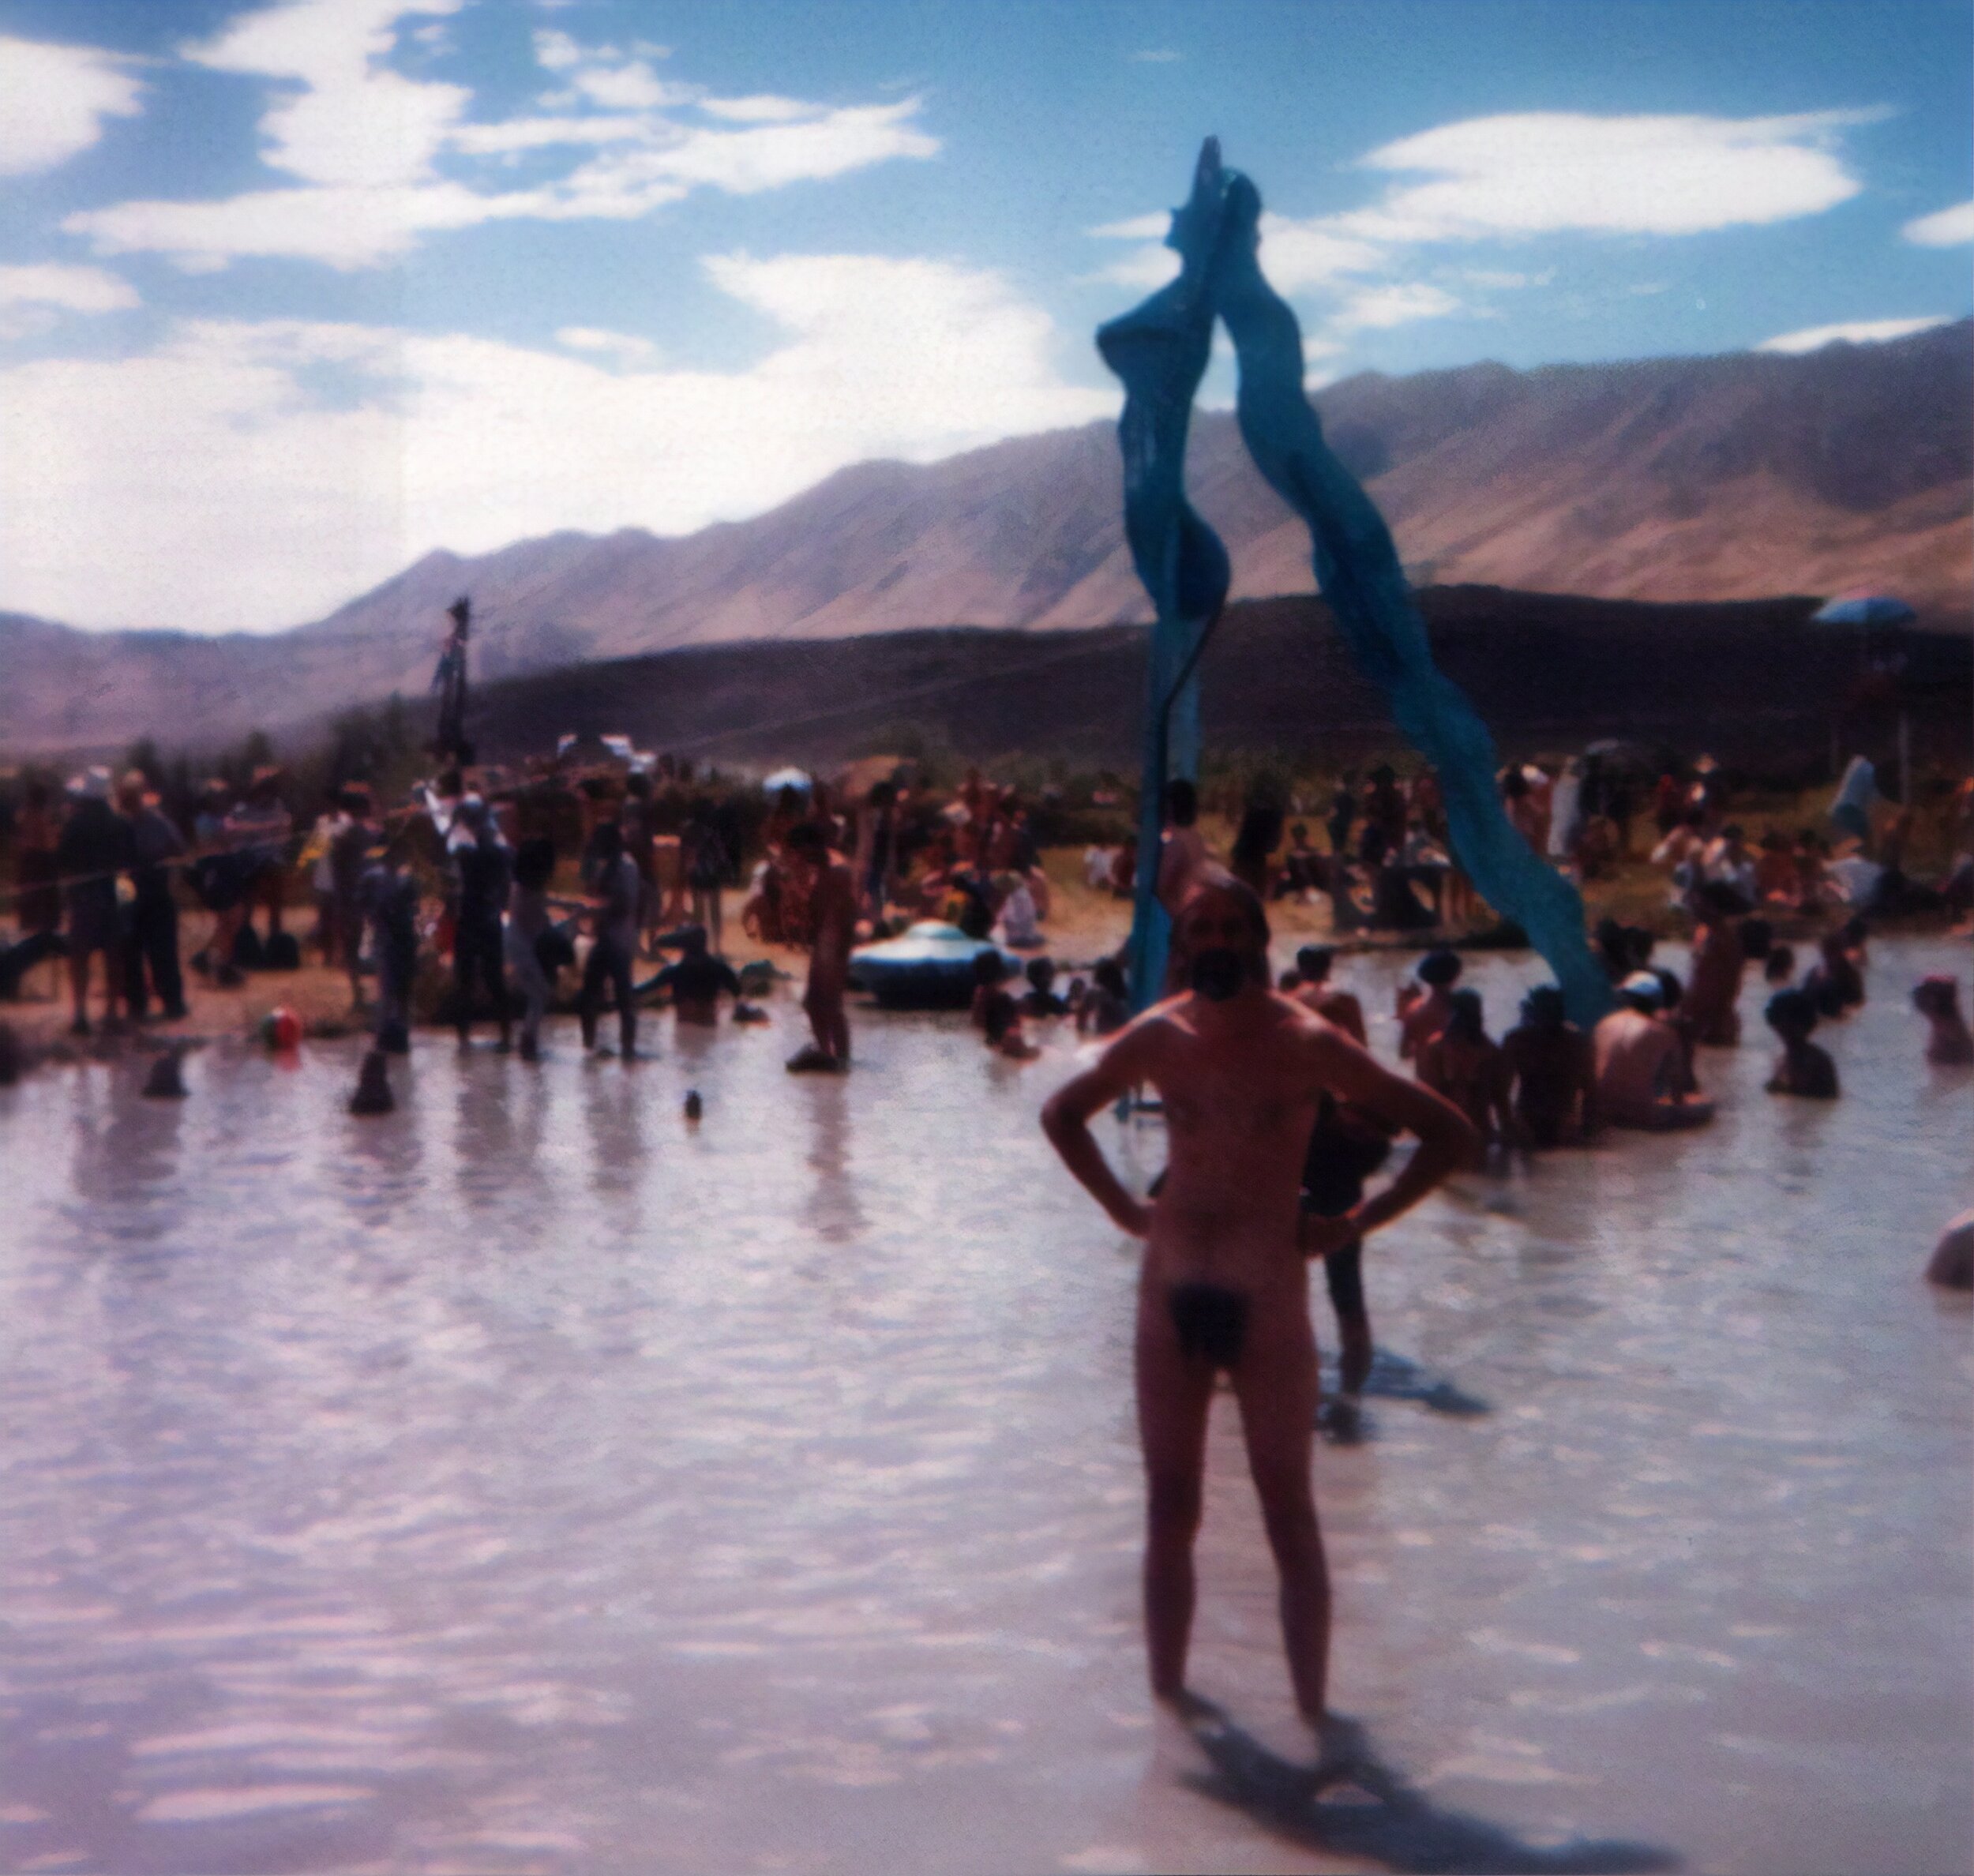  Fly Hot Springs. That's me in the foreground. I took a disposable camera to the springs and unfortunately this is the only picture that came out fairly well. I don't think it is good to leave cameras in the wet grass under the hot sun. You just had 